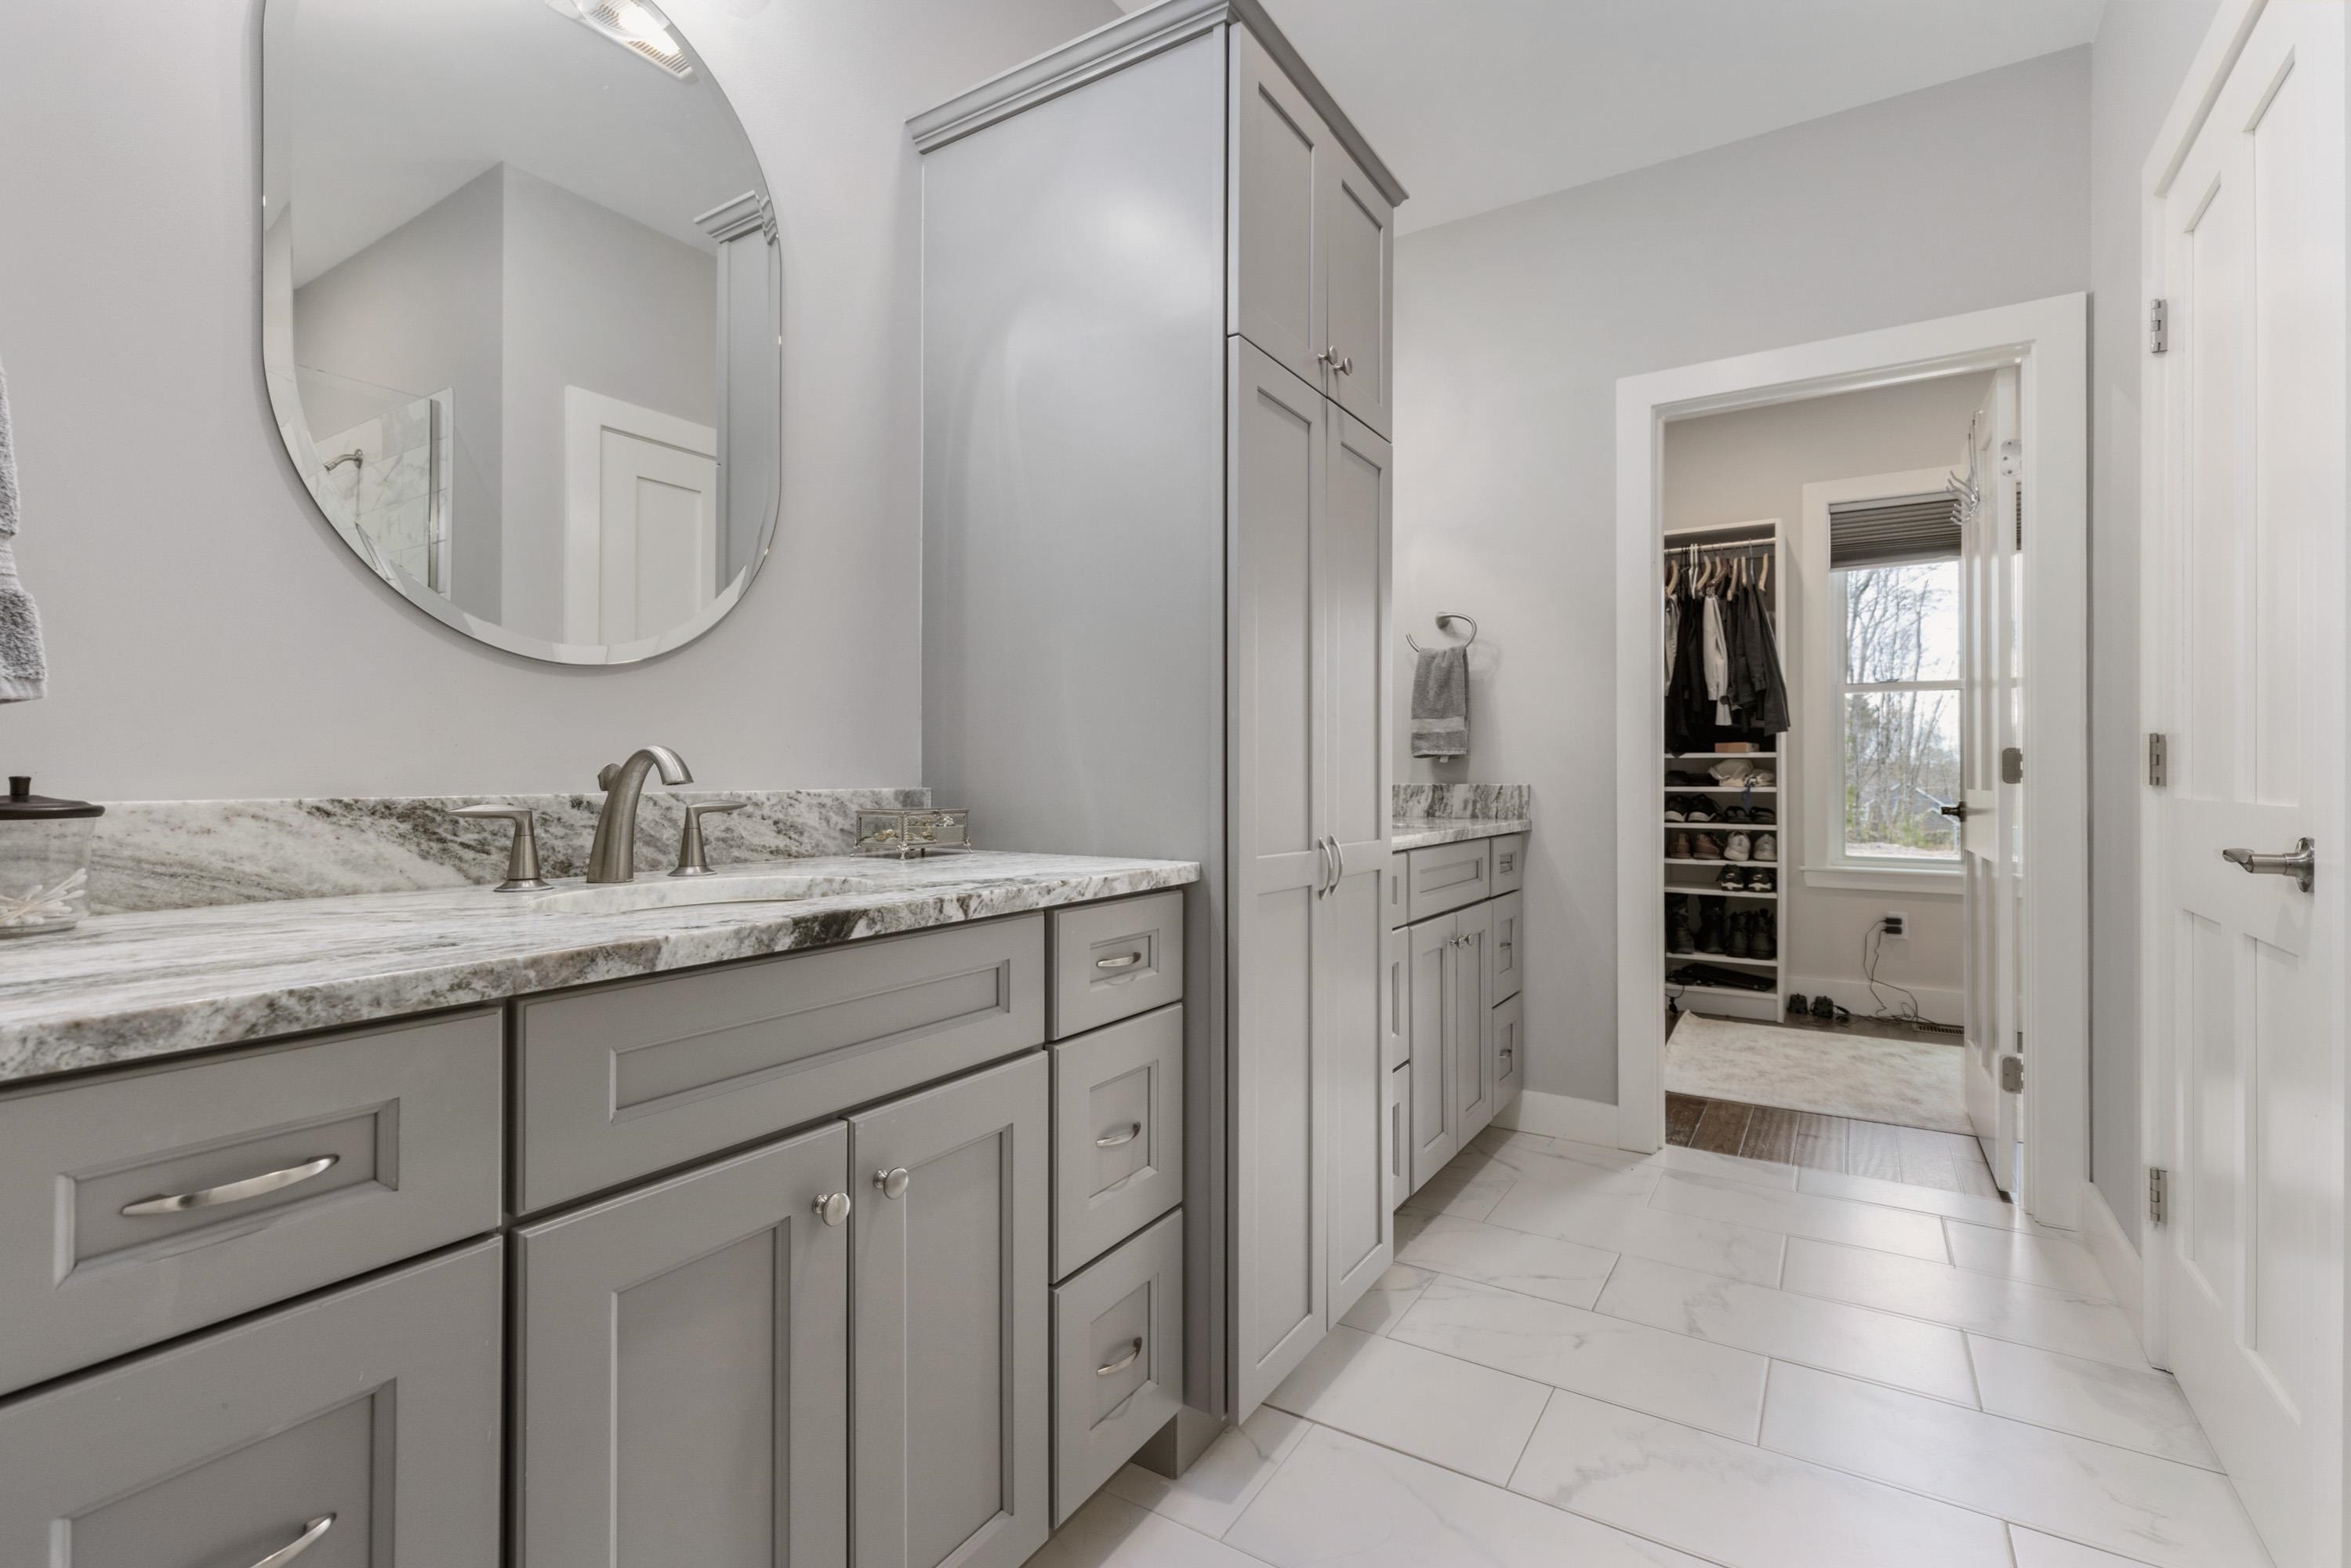 Double vanity sinks, private wash closet, walk-in 2ble head shower